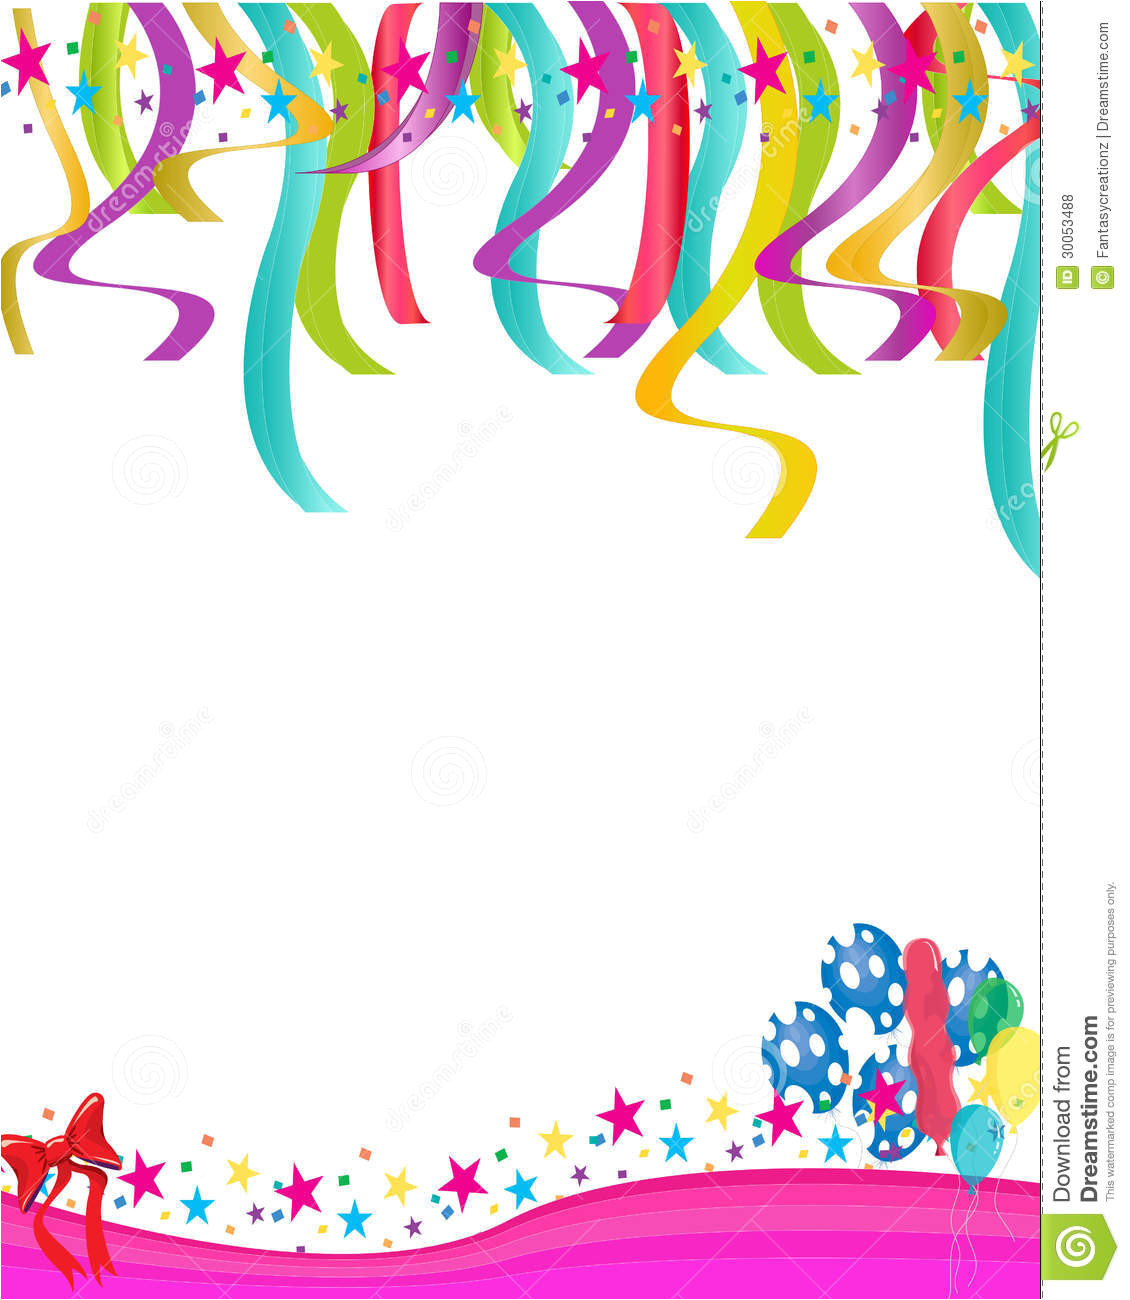 royalty free stock photos colorful balloons statrs illustration birthday cards party invitations backgrounds image30053488